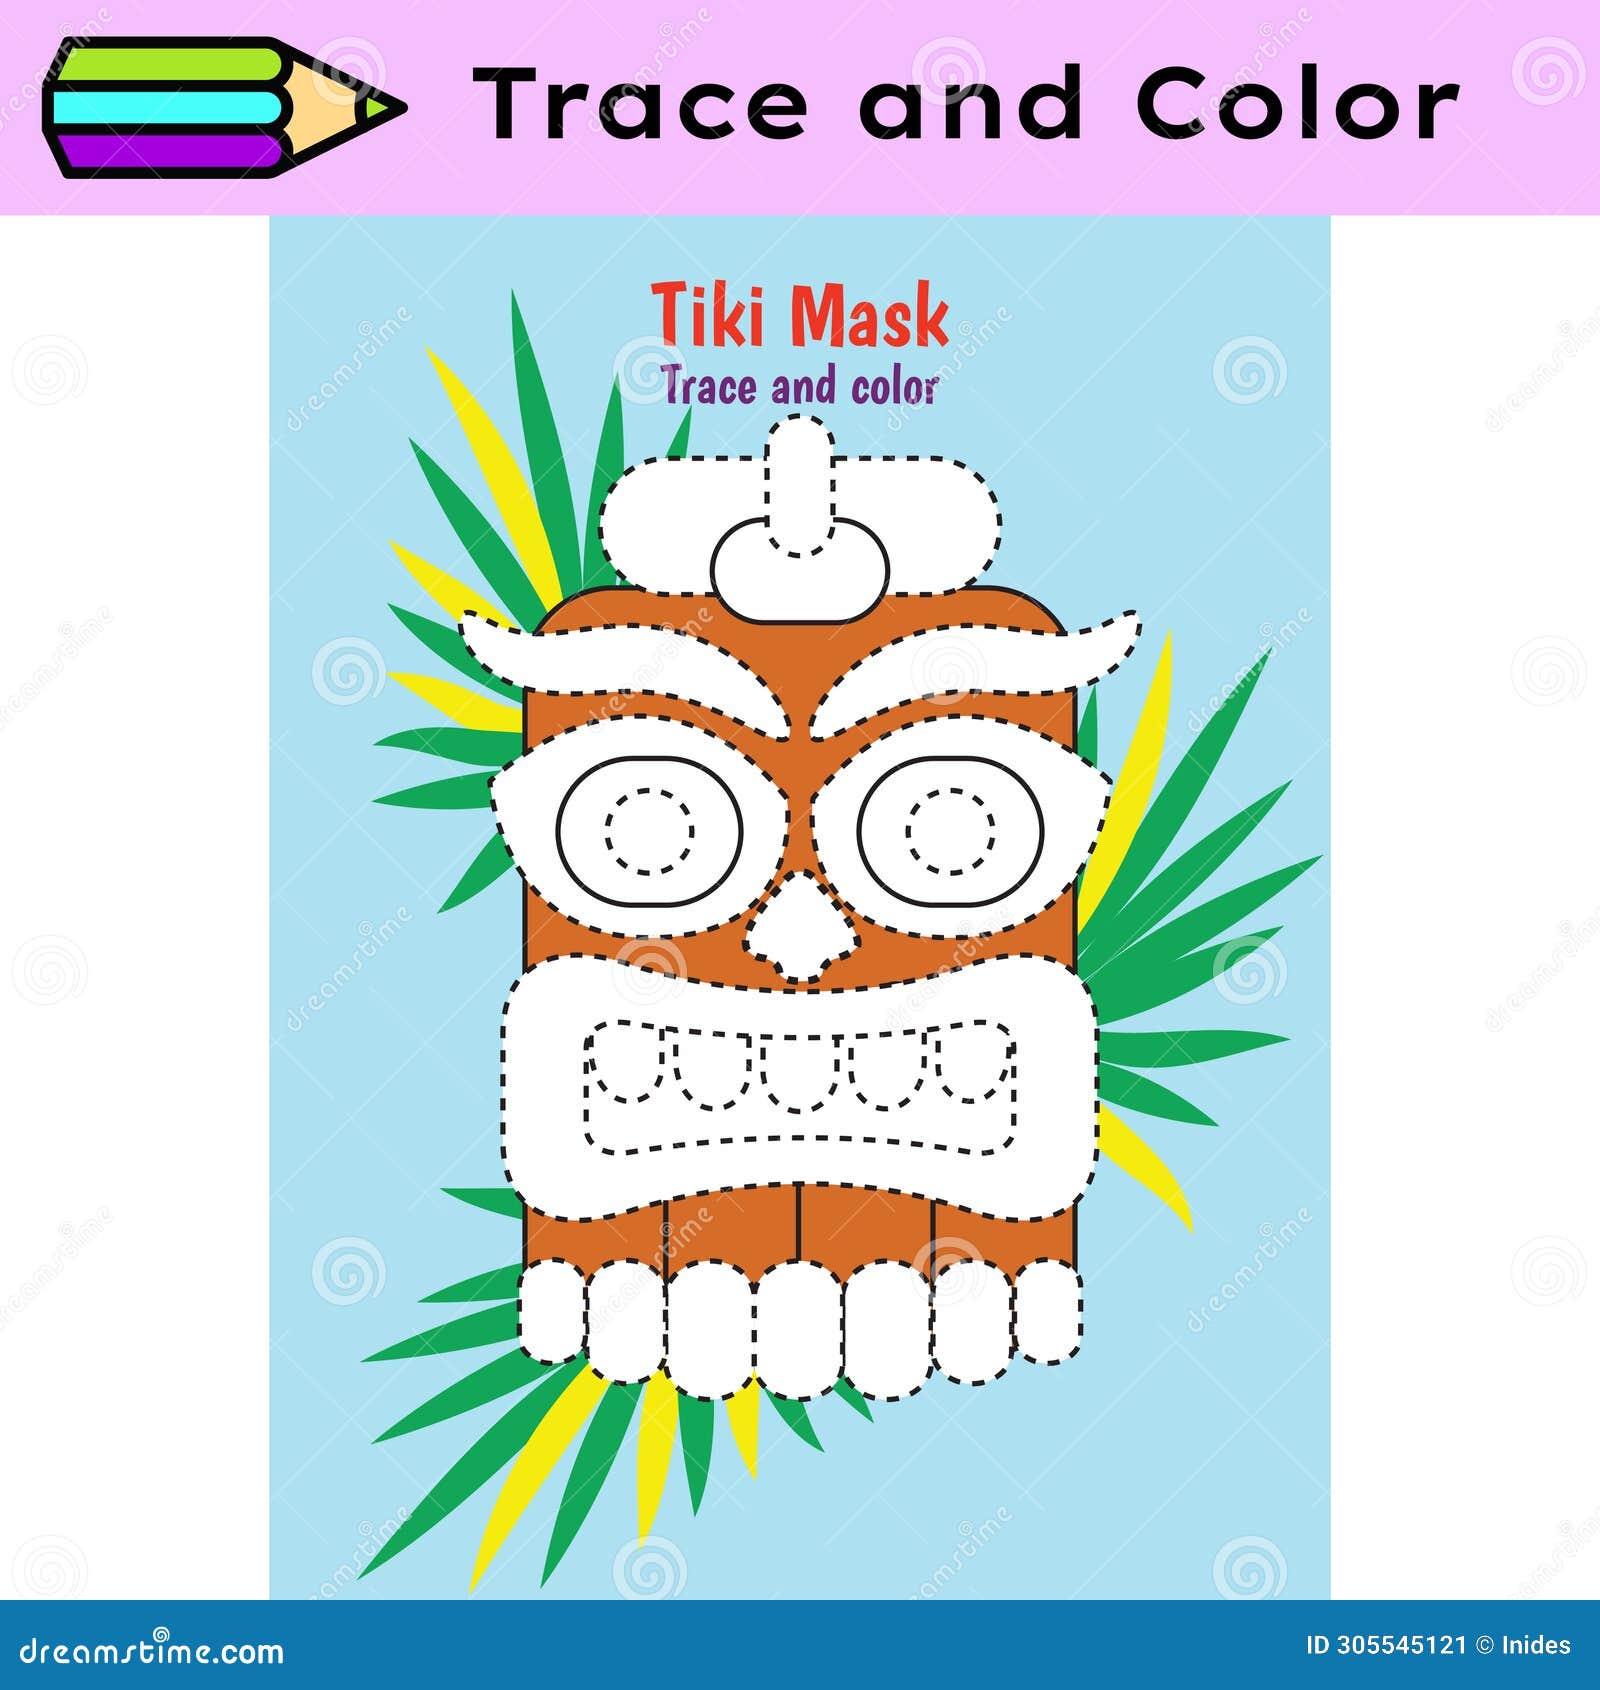 pen tracing lines activity worksheet for children. pencil control for kids practicing motoric skills. tiki mask